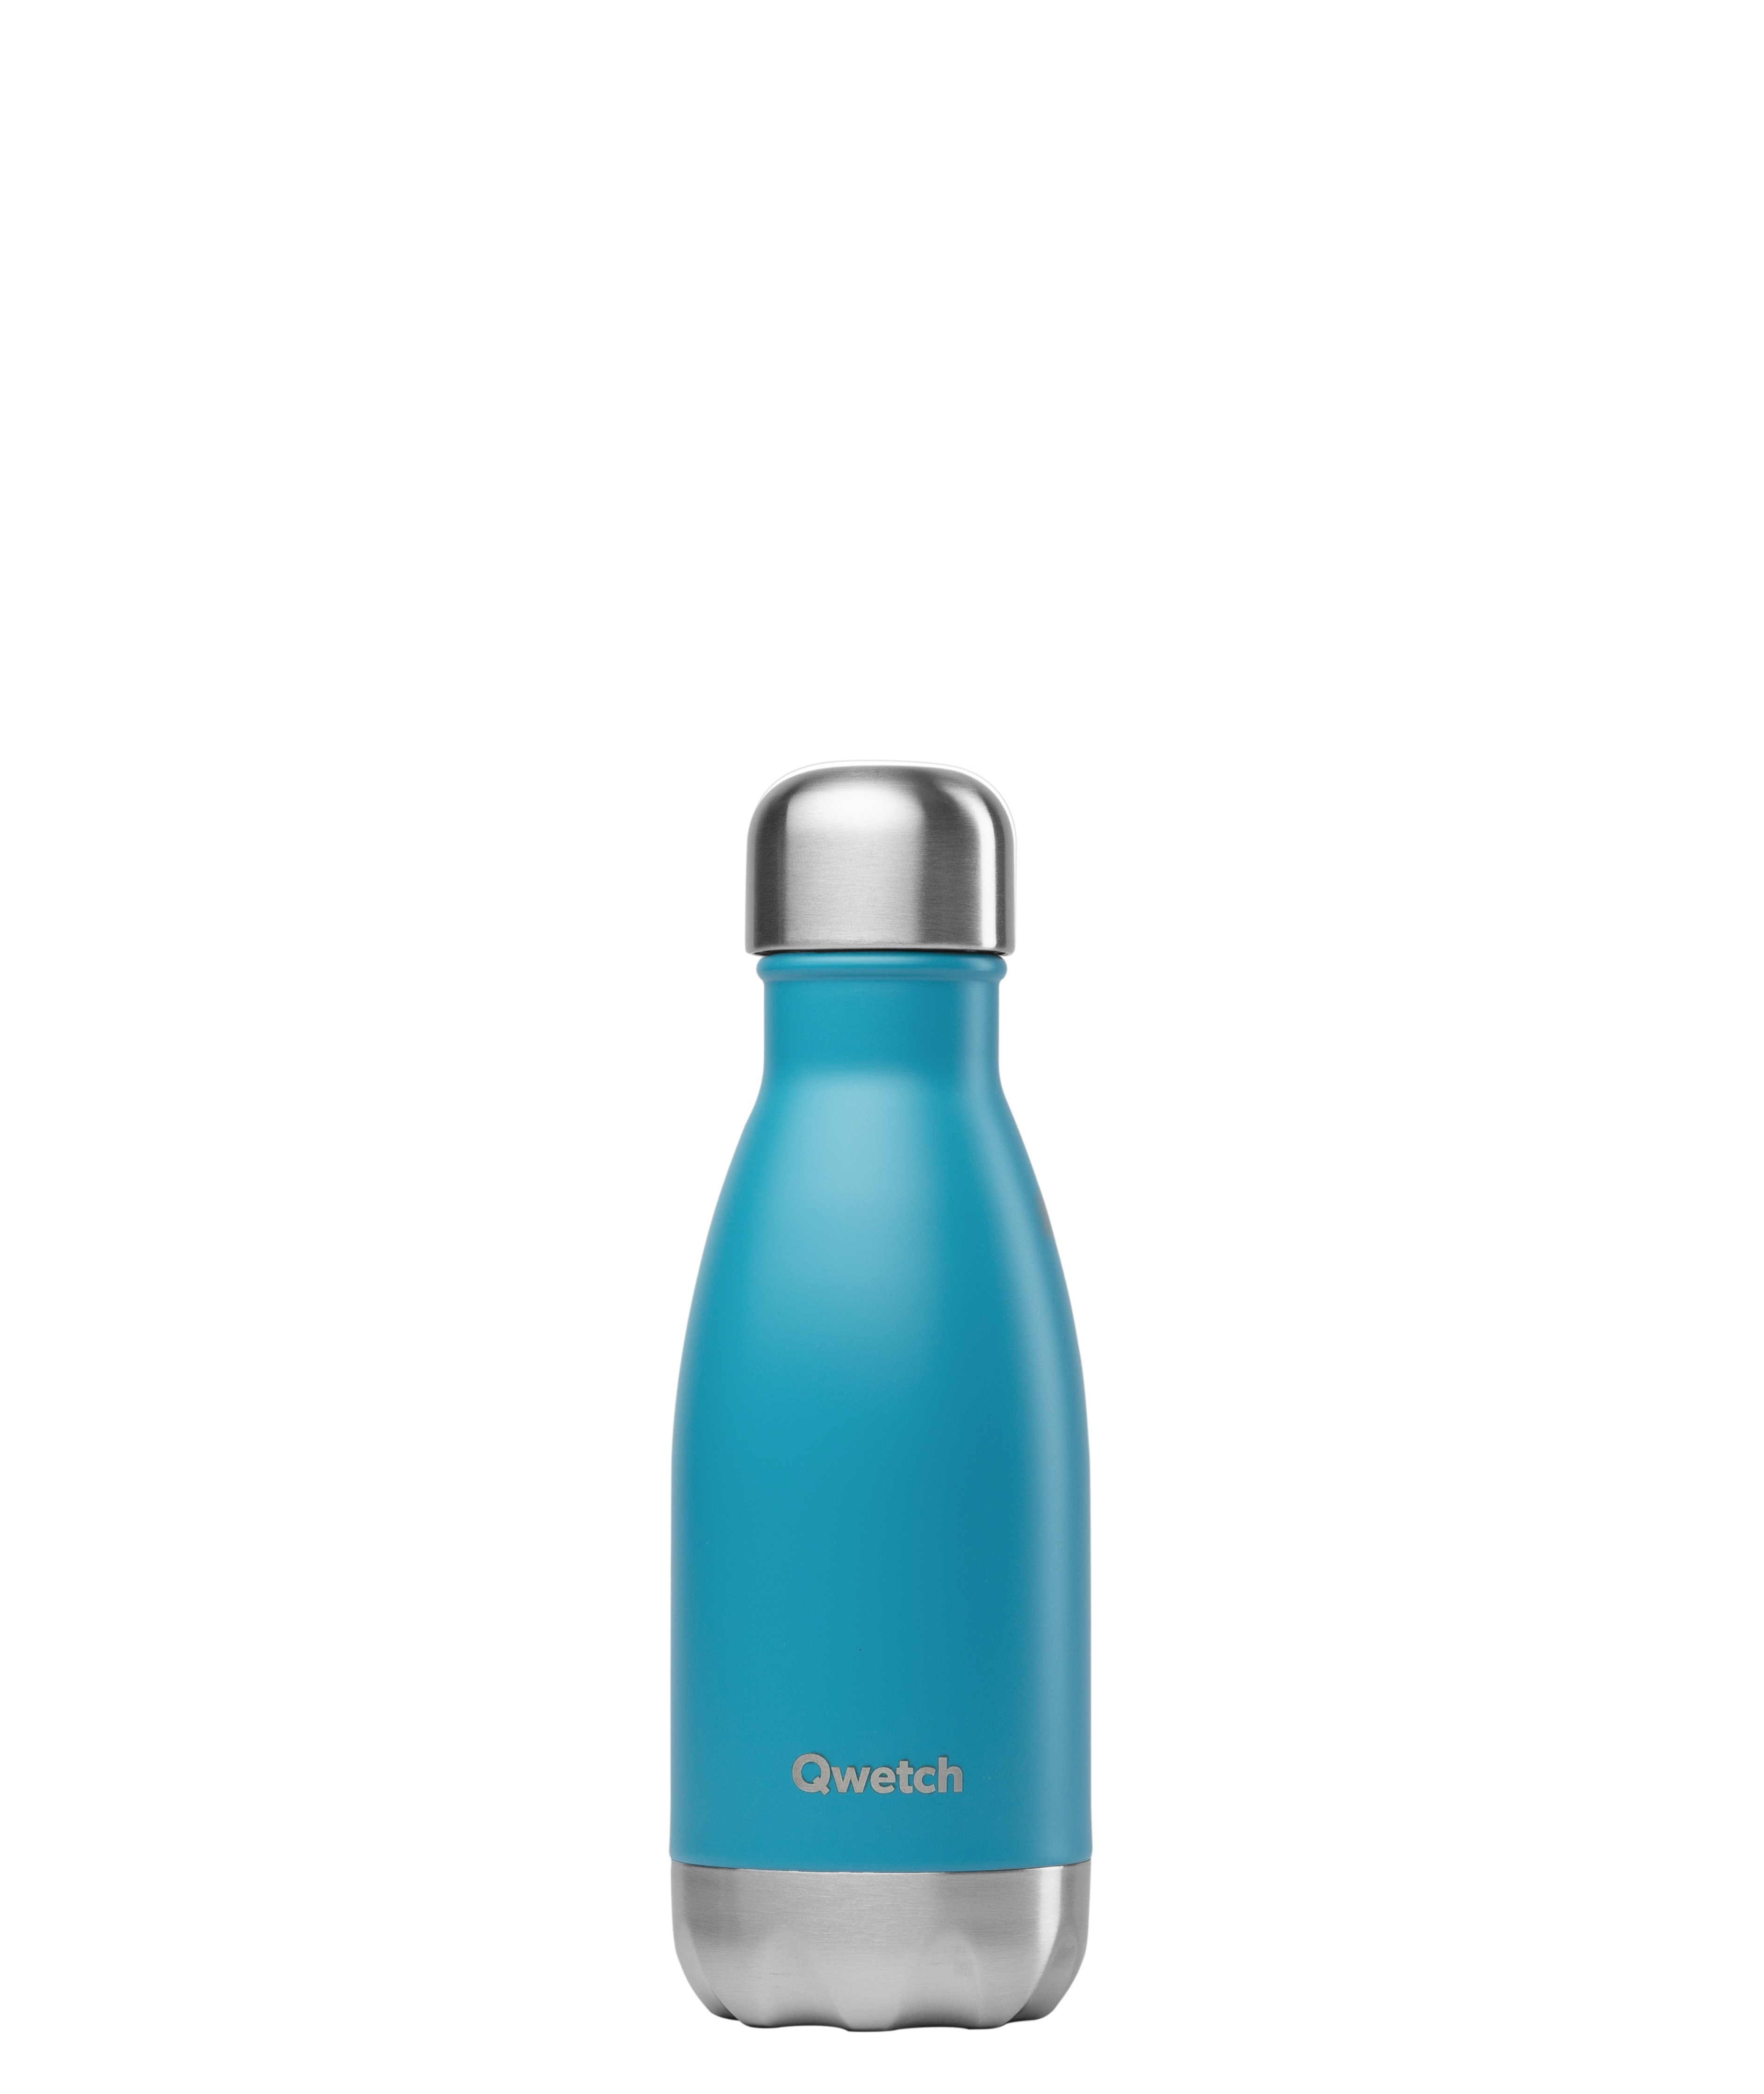 Qwetch Bouteille isotherme inox original bleu turquoise 260ml - 10002